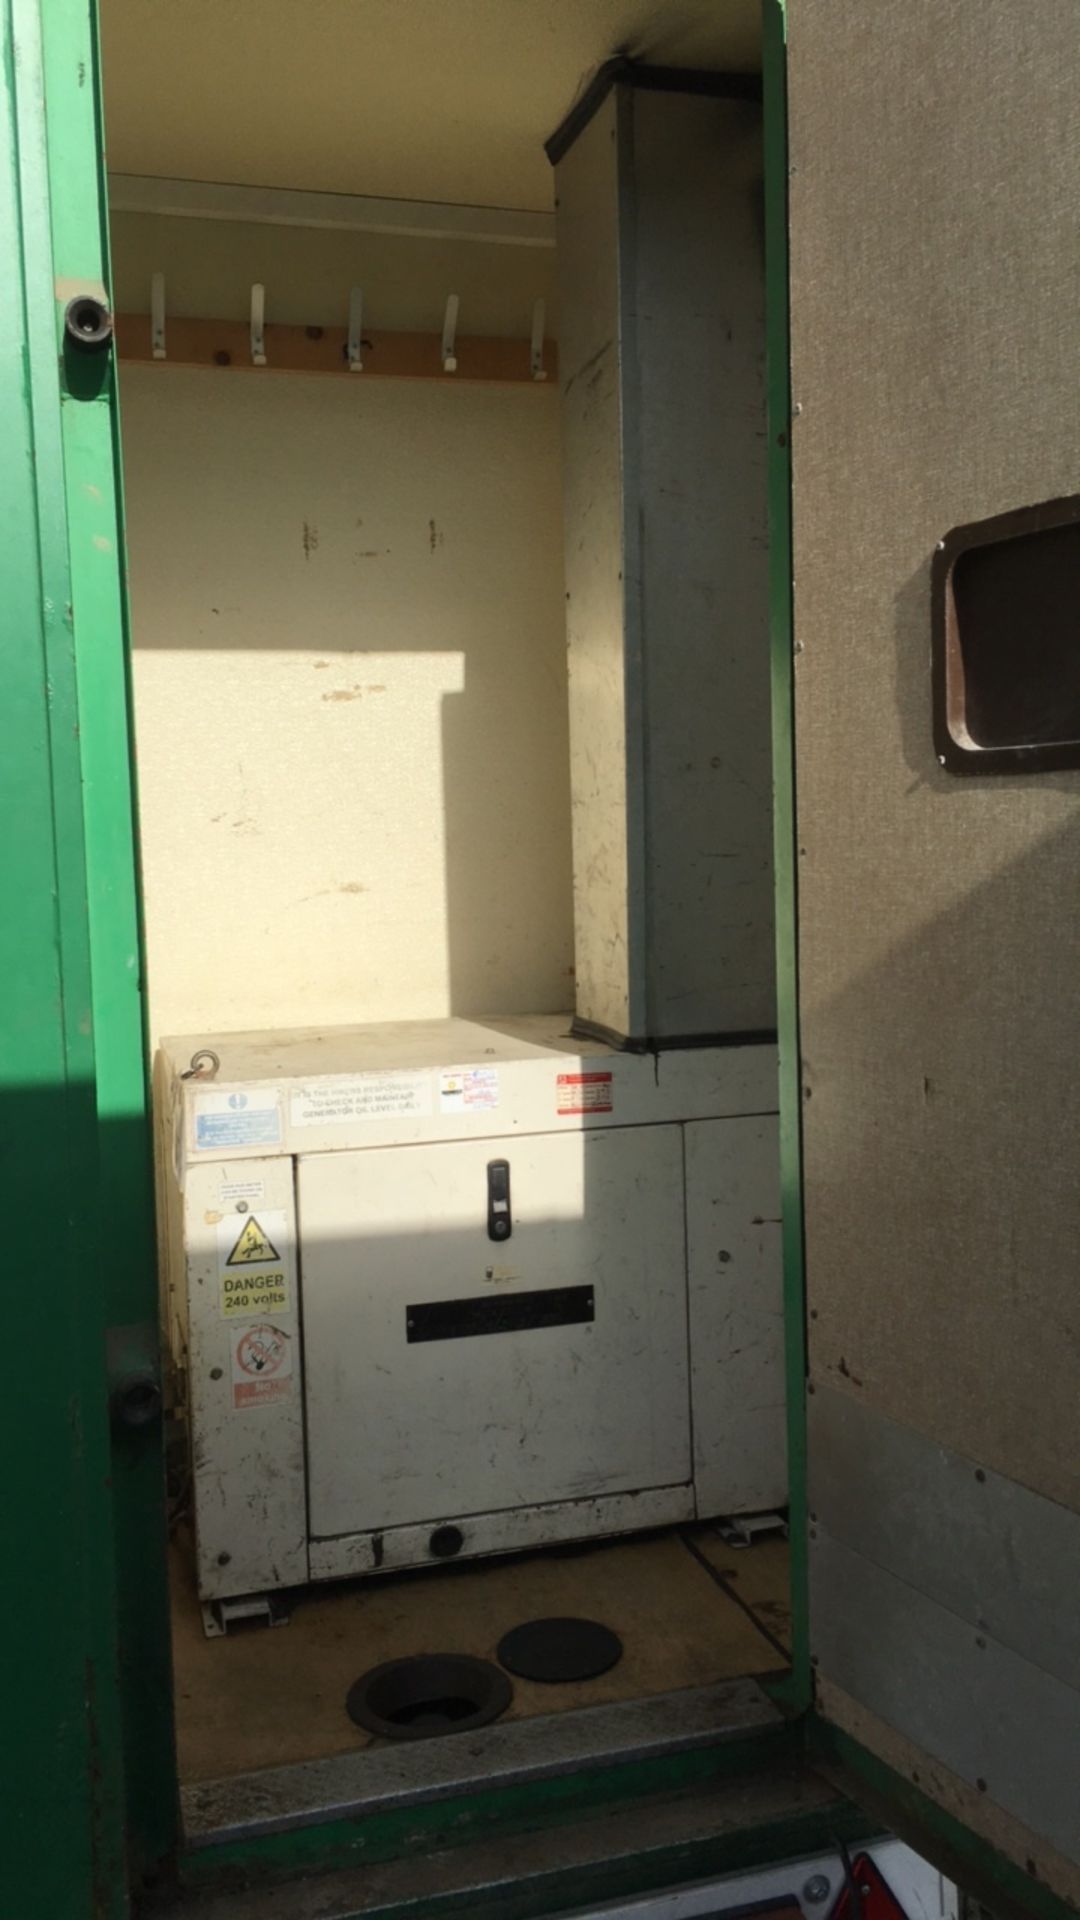 Mobile Welfare unit, Groundhog, GP360, 6 person (A540968) - Image 12 of 14